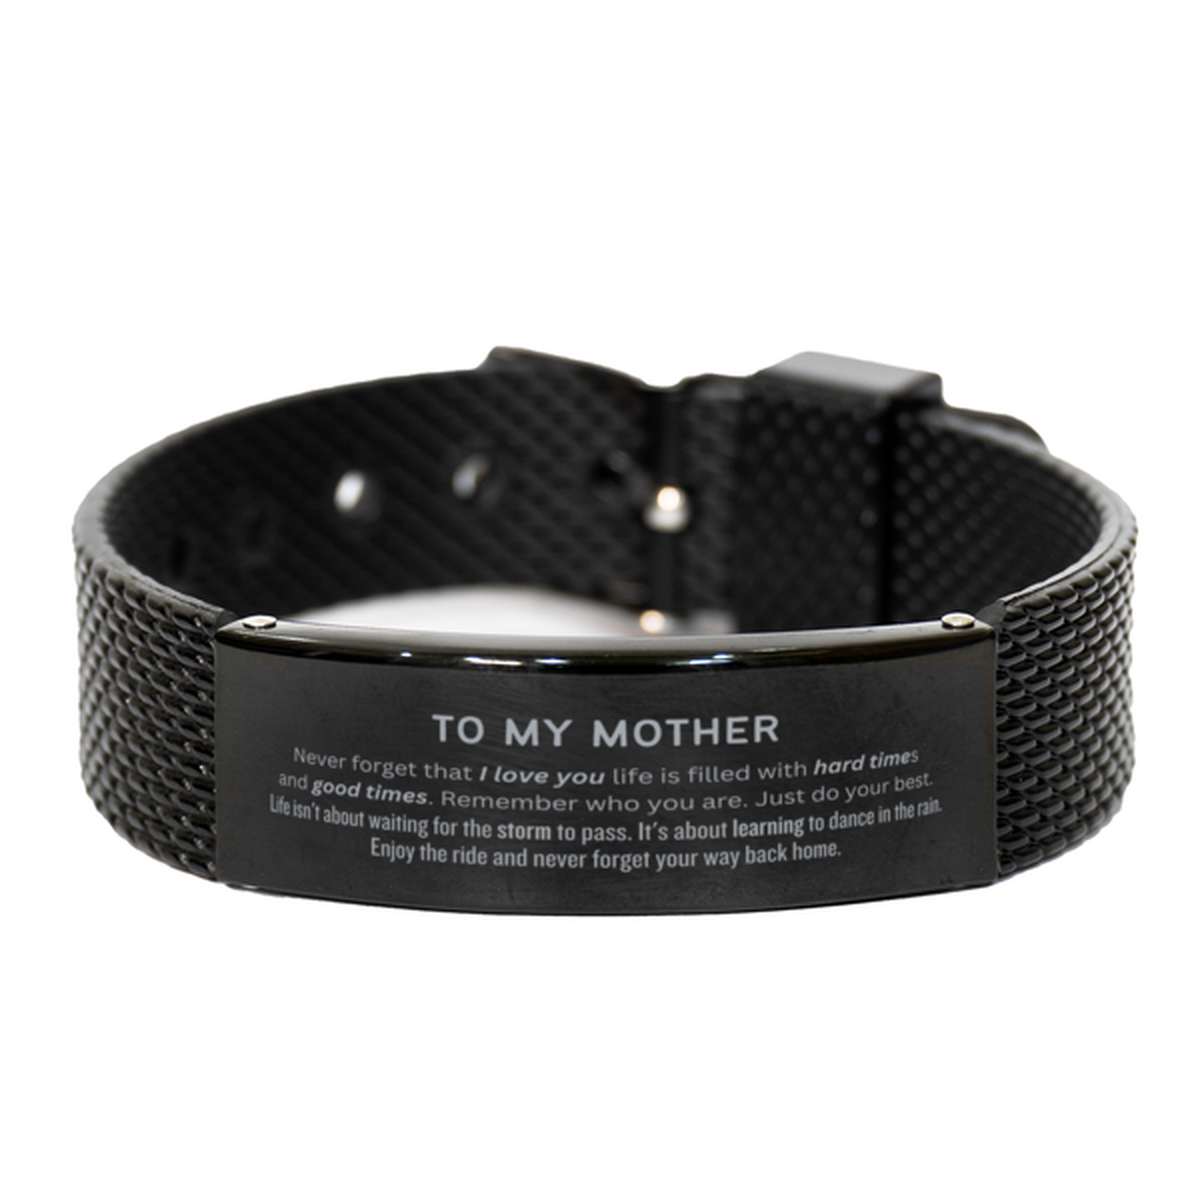 Christmas Mother Black Shark Mesh Bracelet Gifts, To My Mother Birthday Thank You Gifts For Mother, Graduation Unique Gifts For Mother To My Mother Never forget that I love you life is filled with hard times and good times. Remember who you are. Just do y